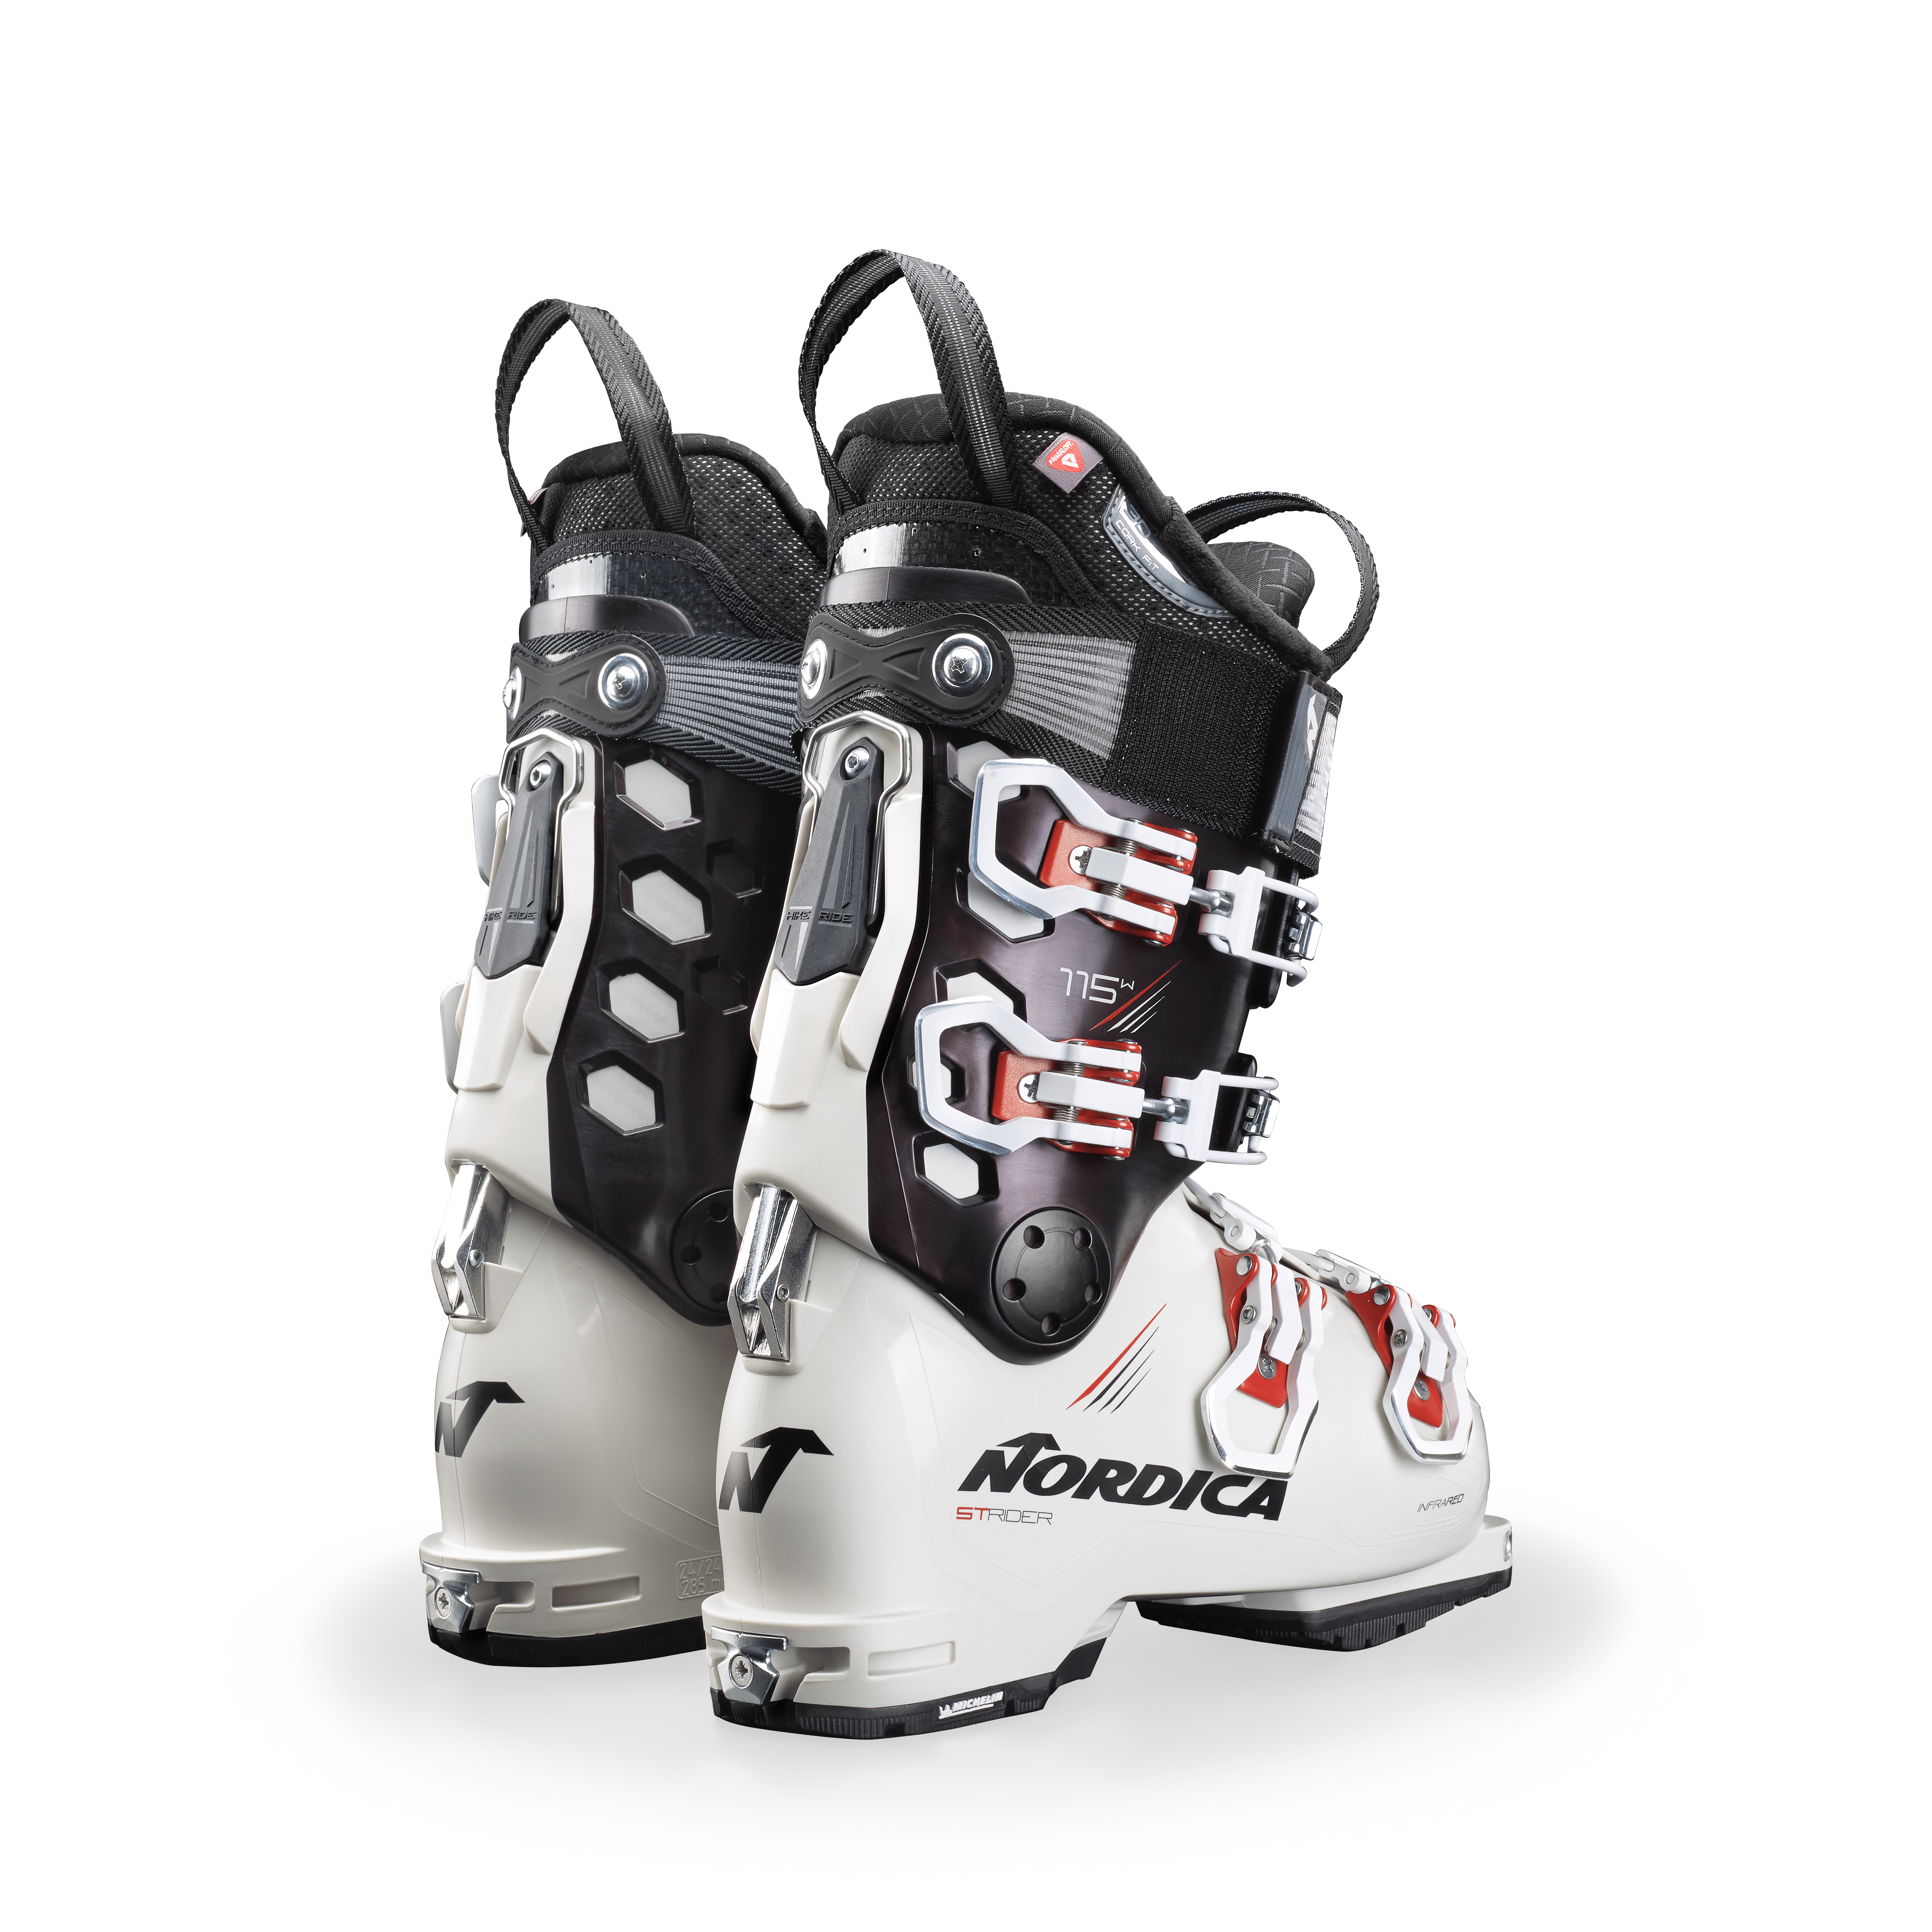 STRIDER 115 W DYN Nordica - Skis and Boots – Official website